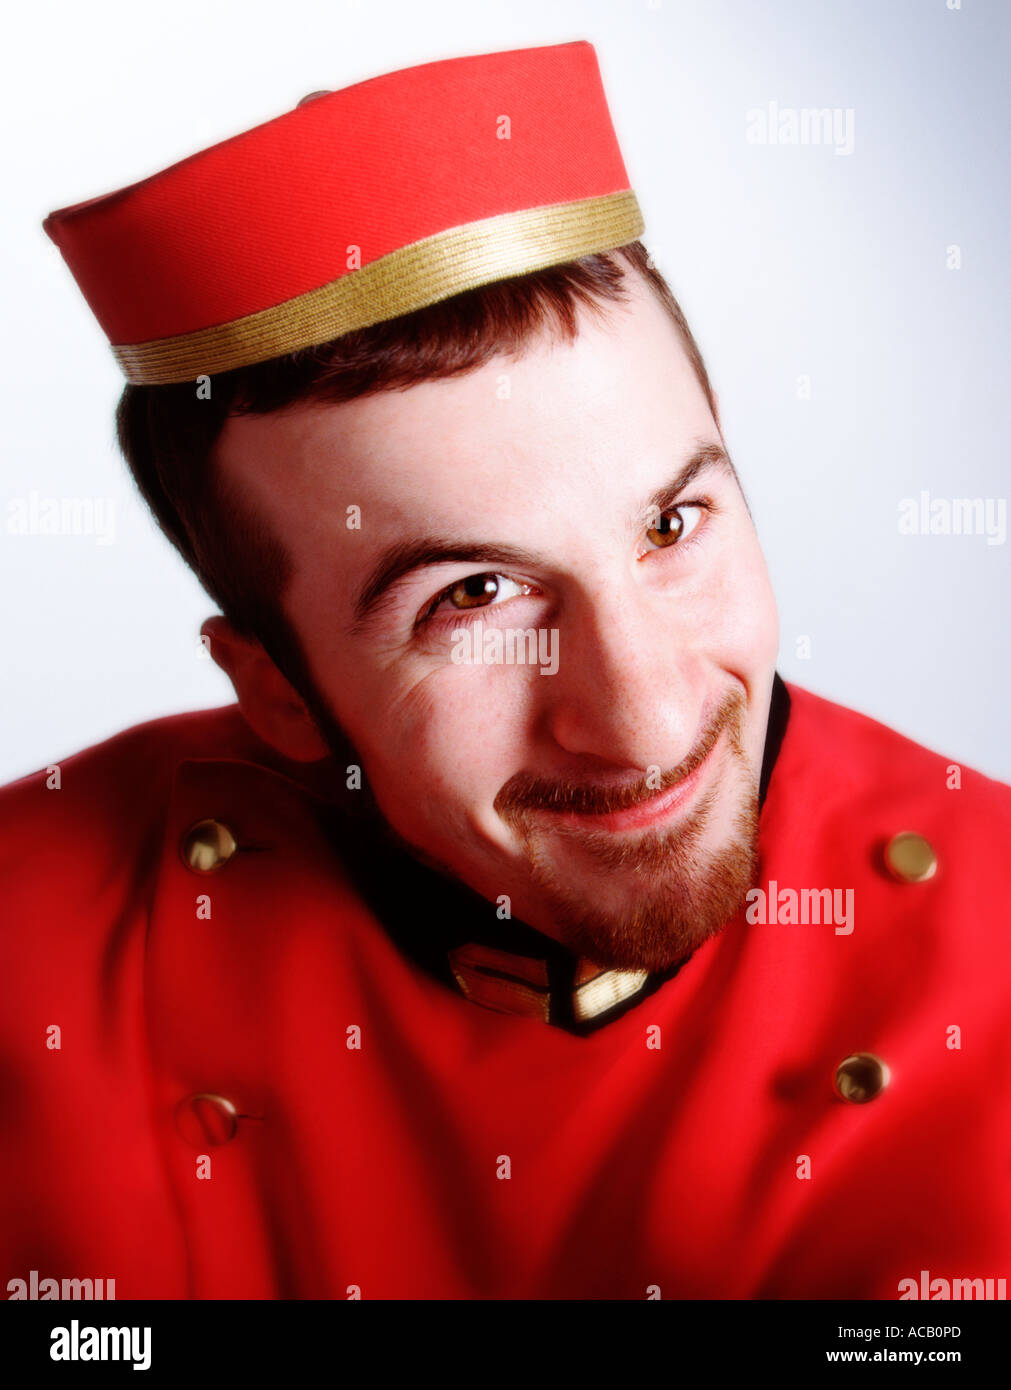 Obsequious bellhop Stock Photo